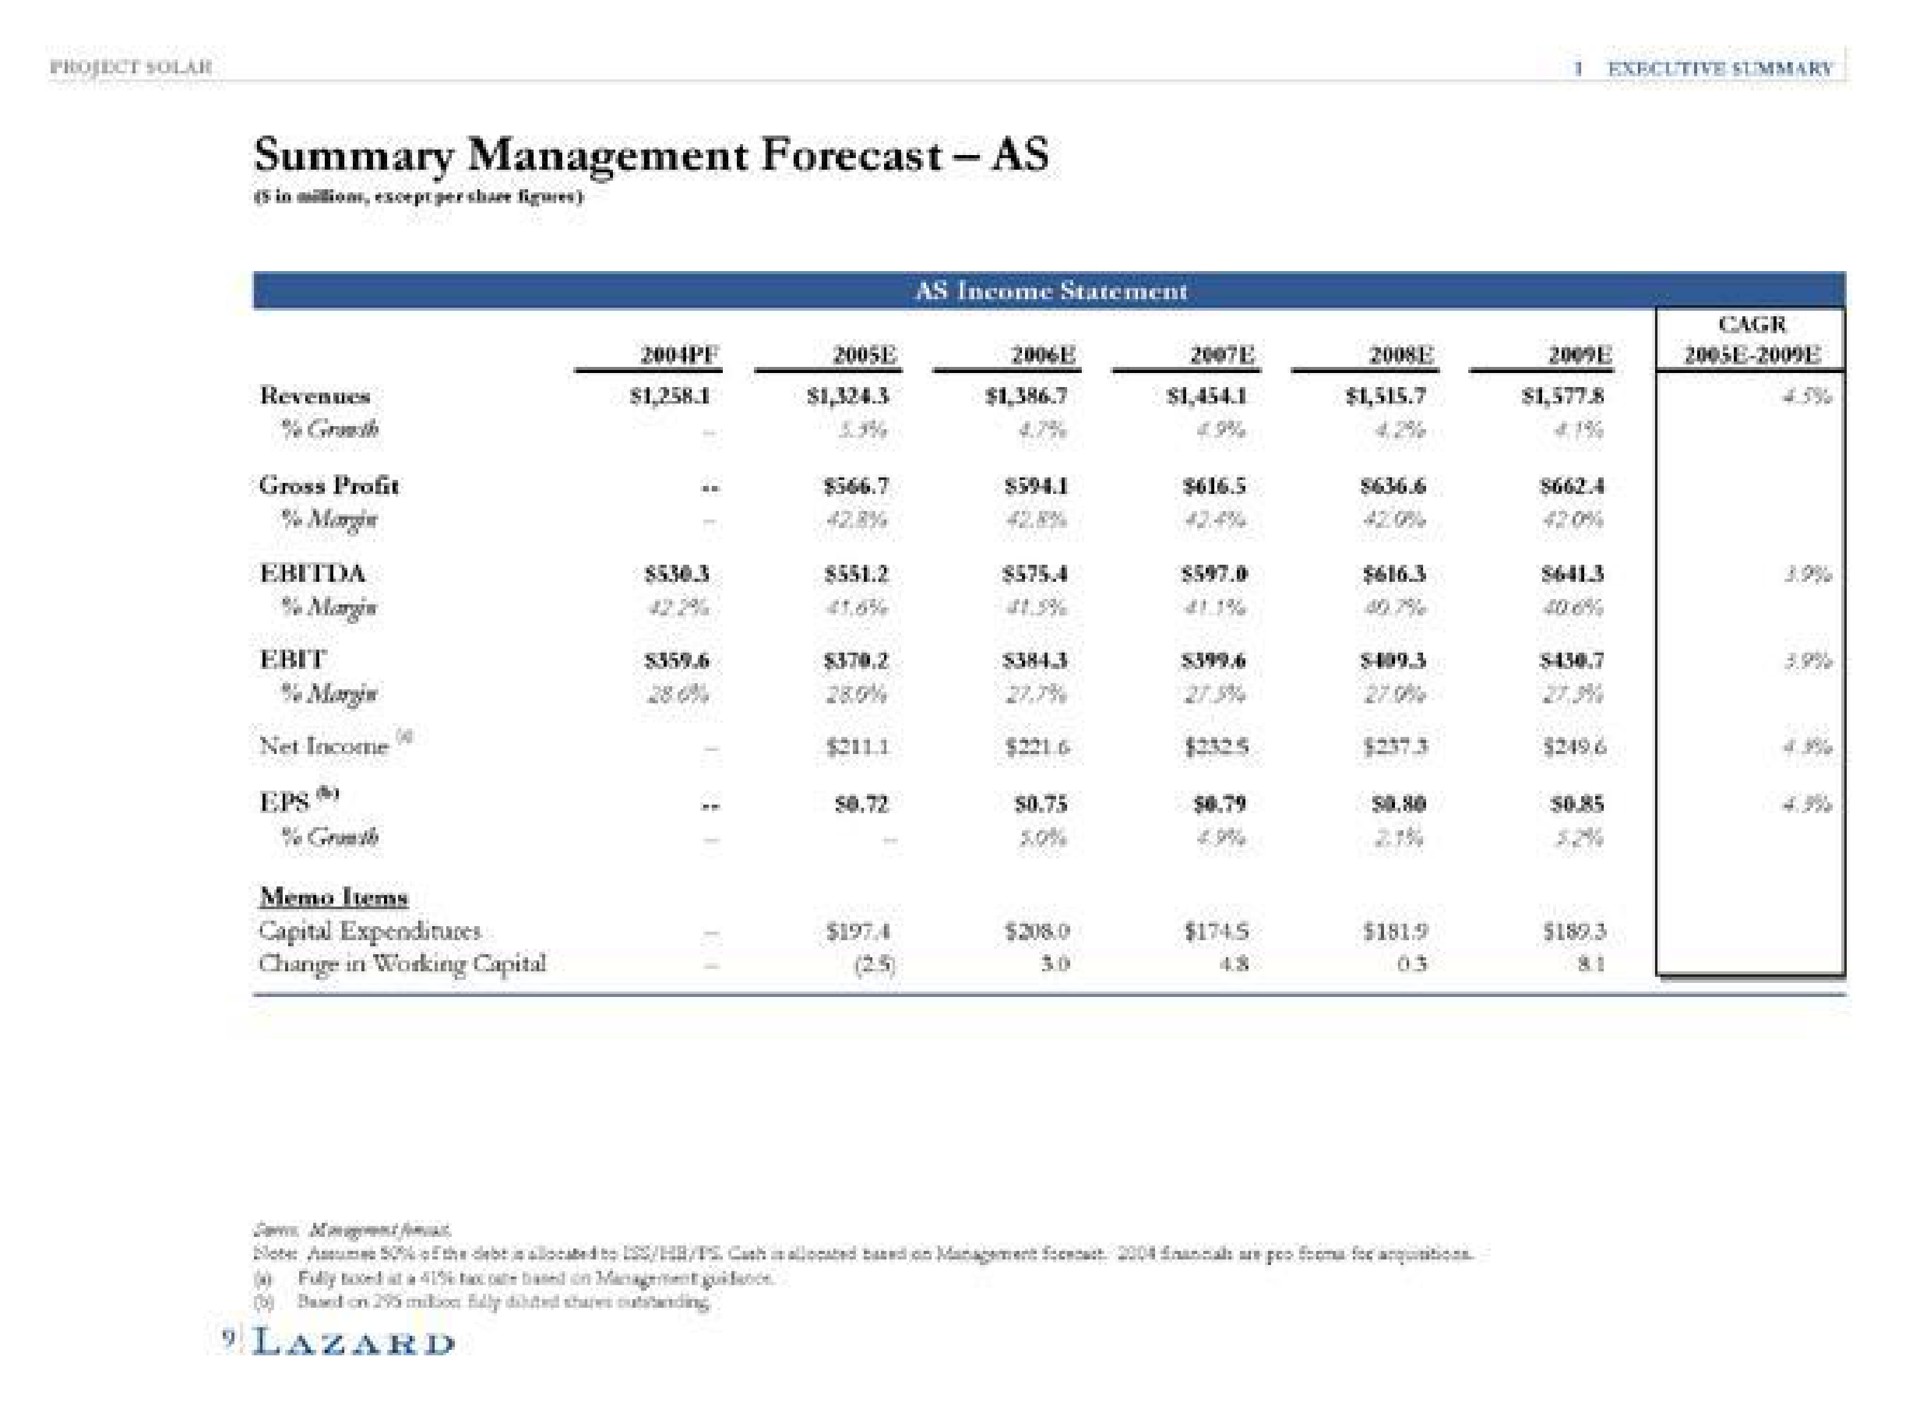 summary management forecast as is an memo terms | Lazard